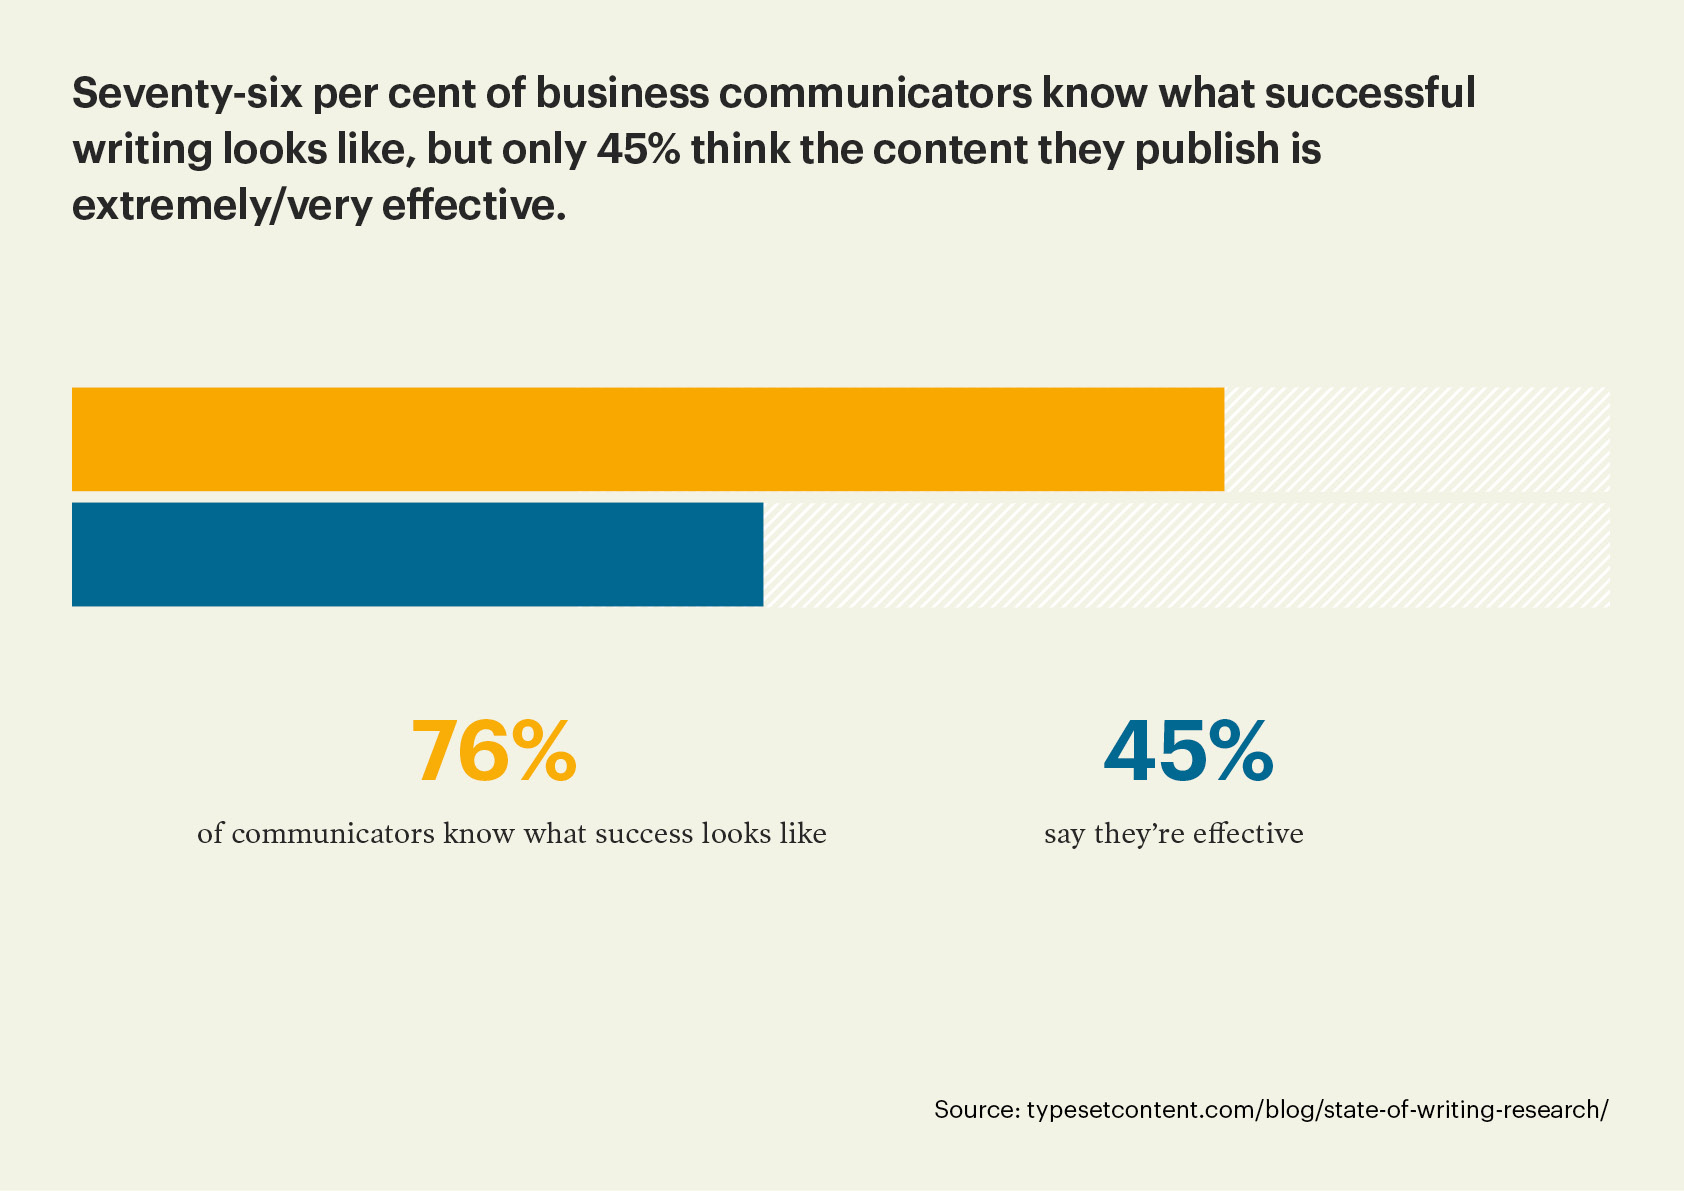 Bar graph showing 76% of business communicators know what successful writing looks like, but only 45% are experiencing it. 